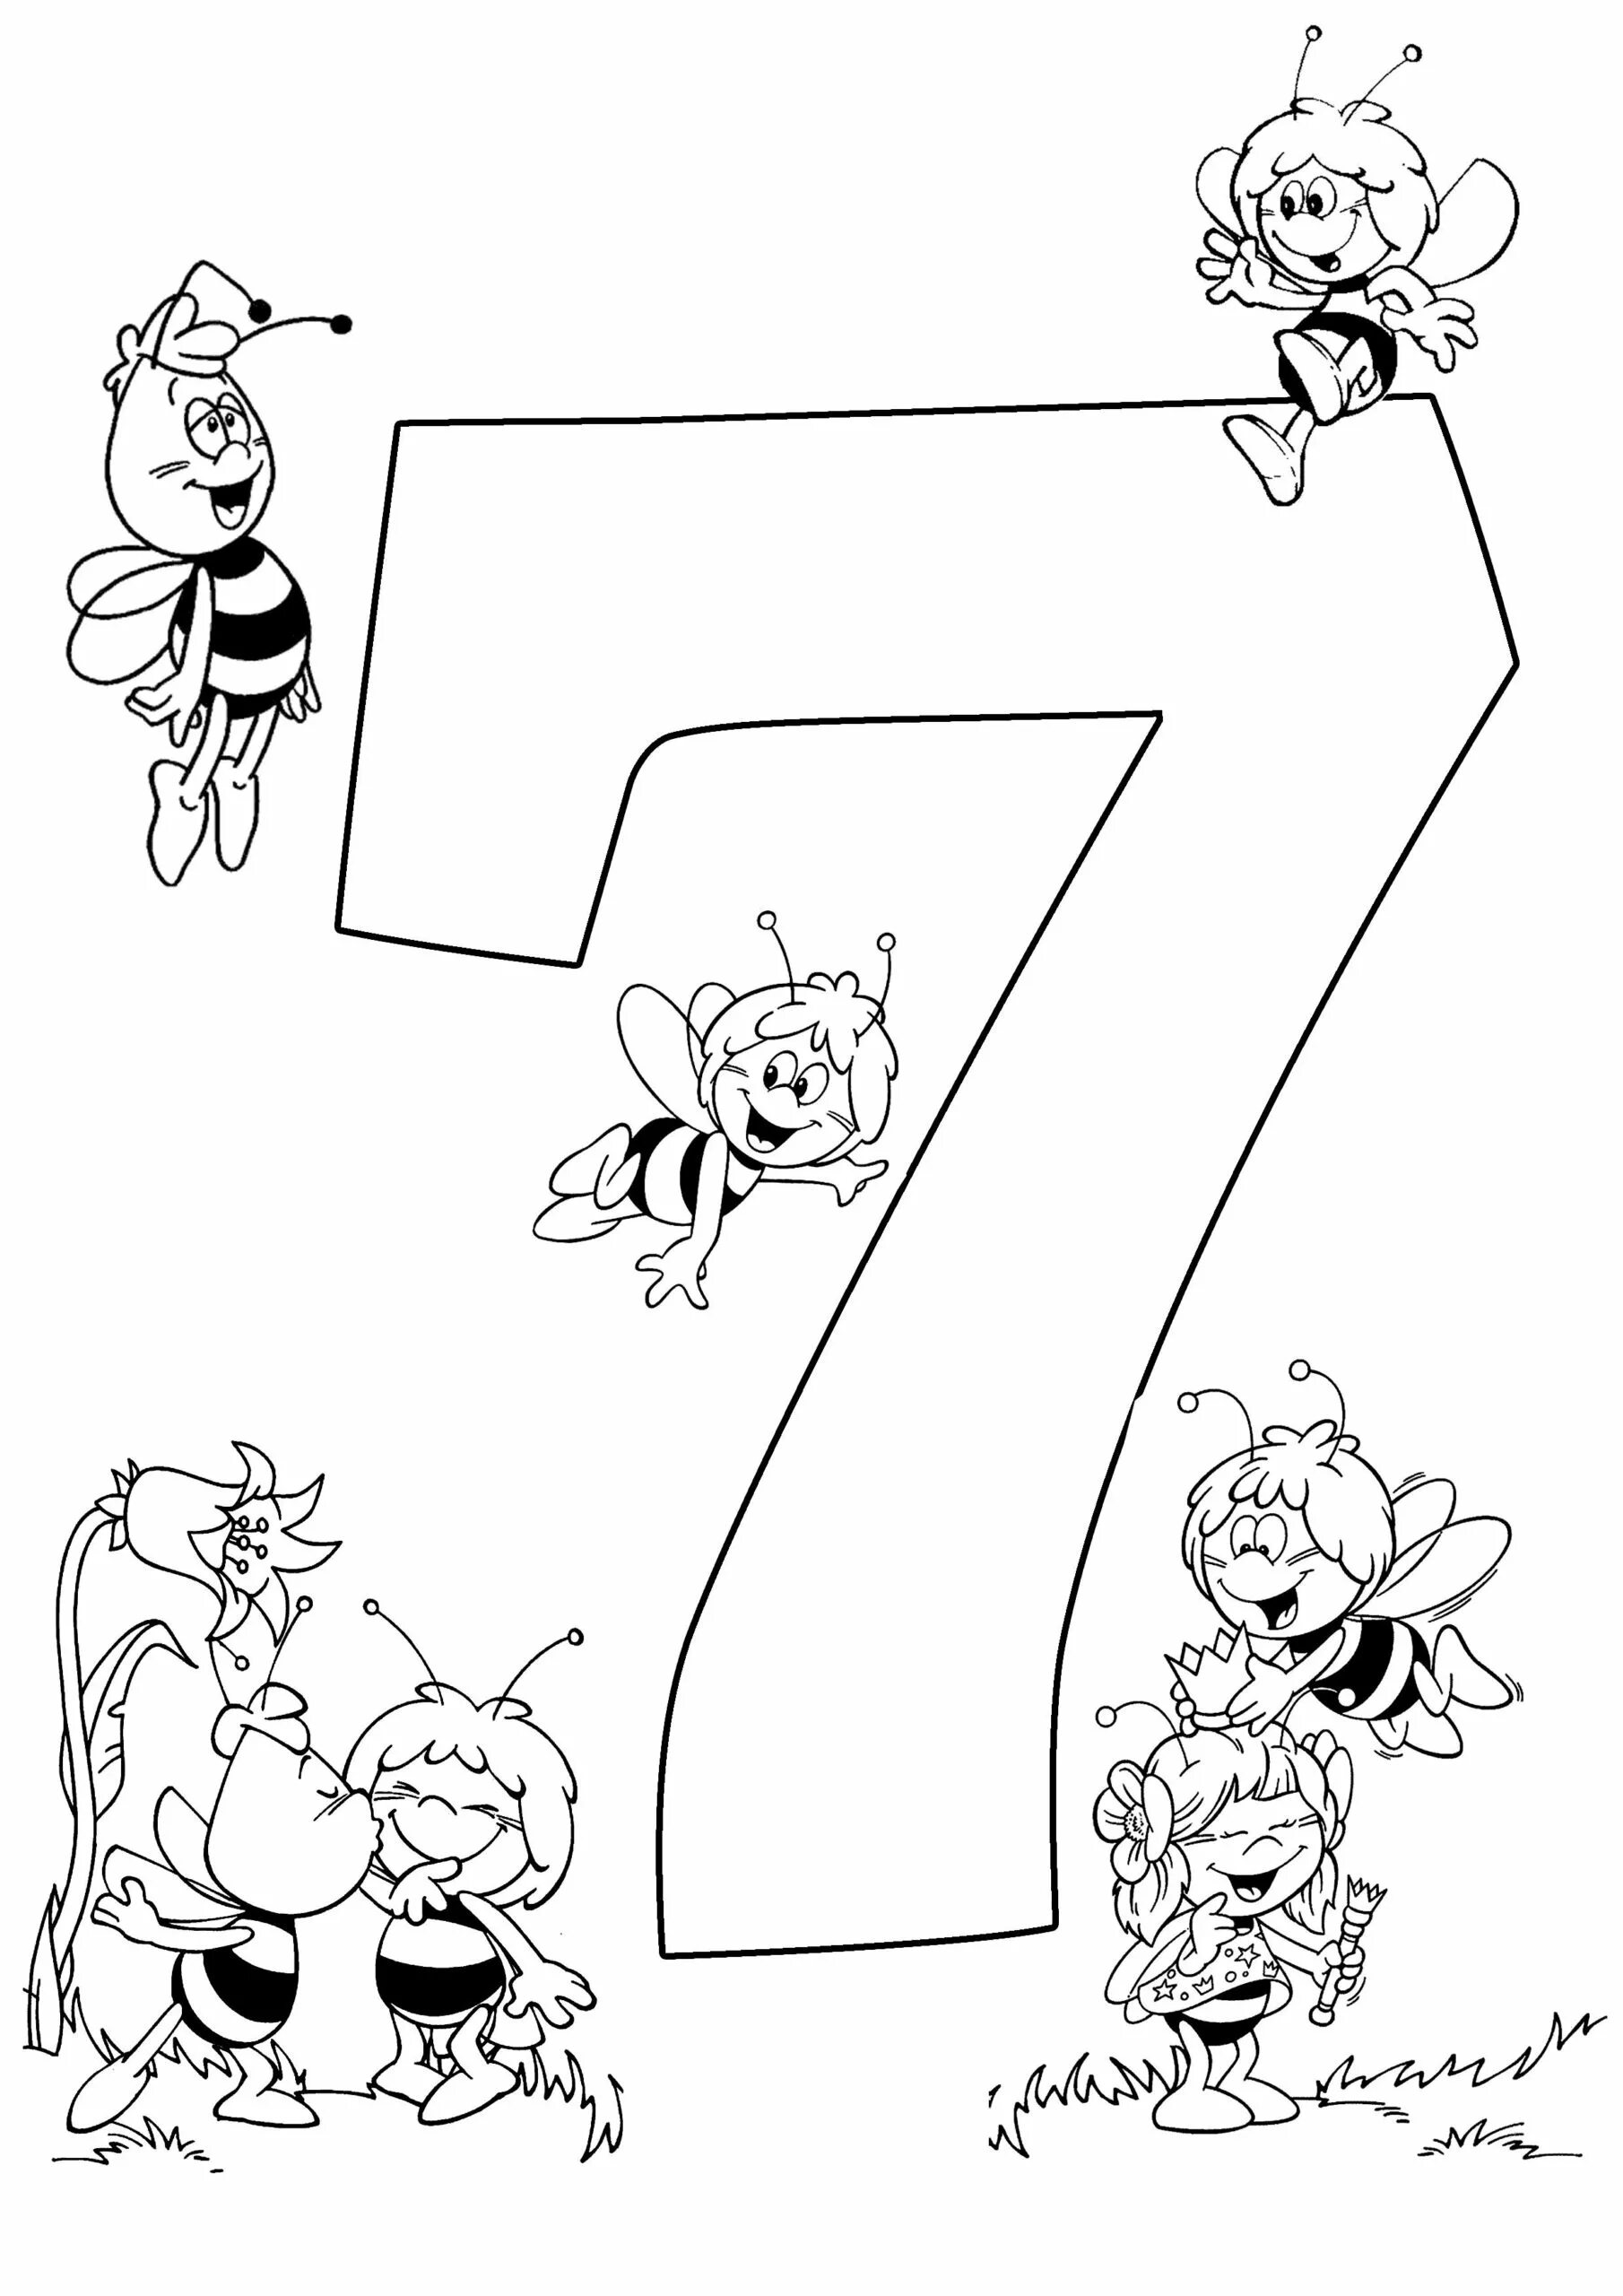 7 for kids #11